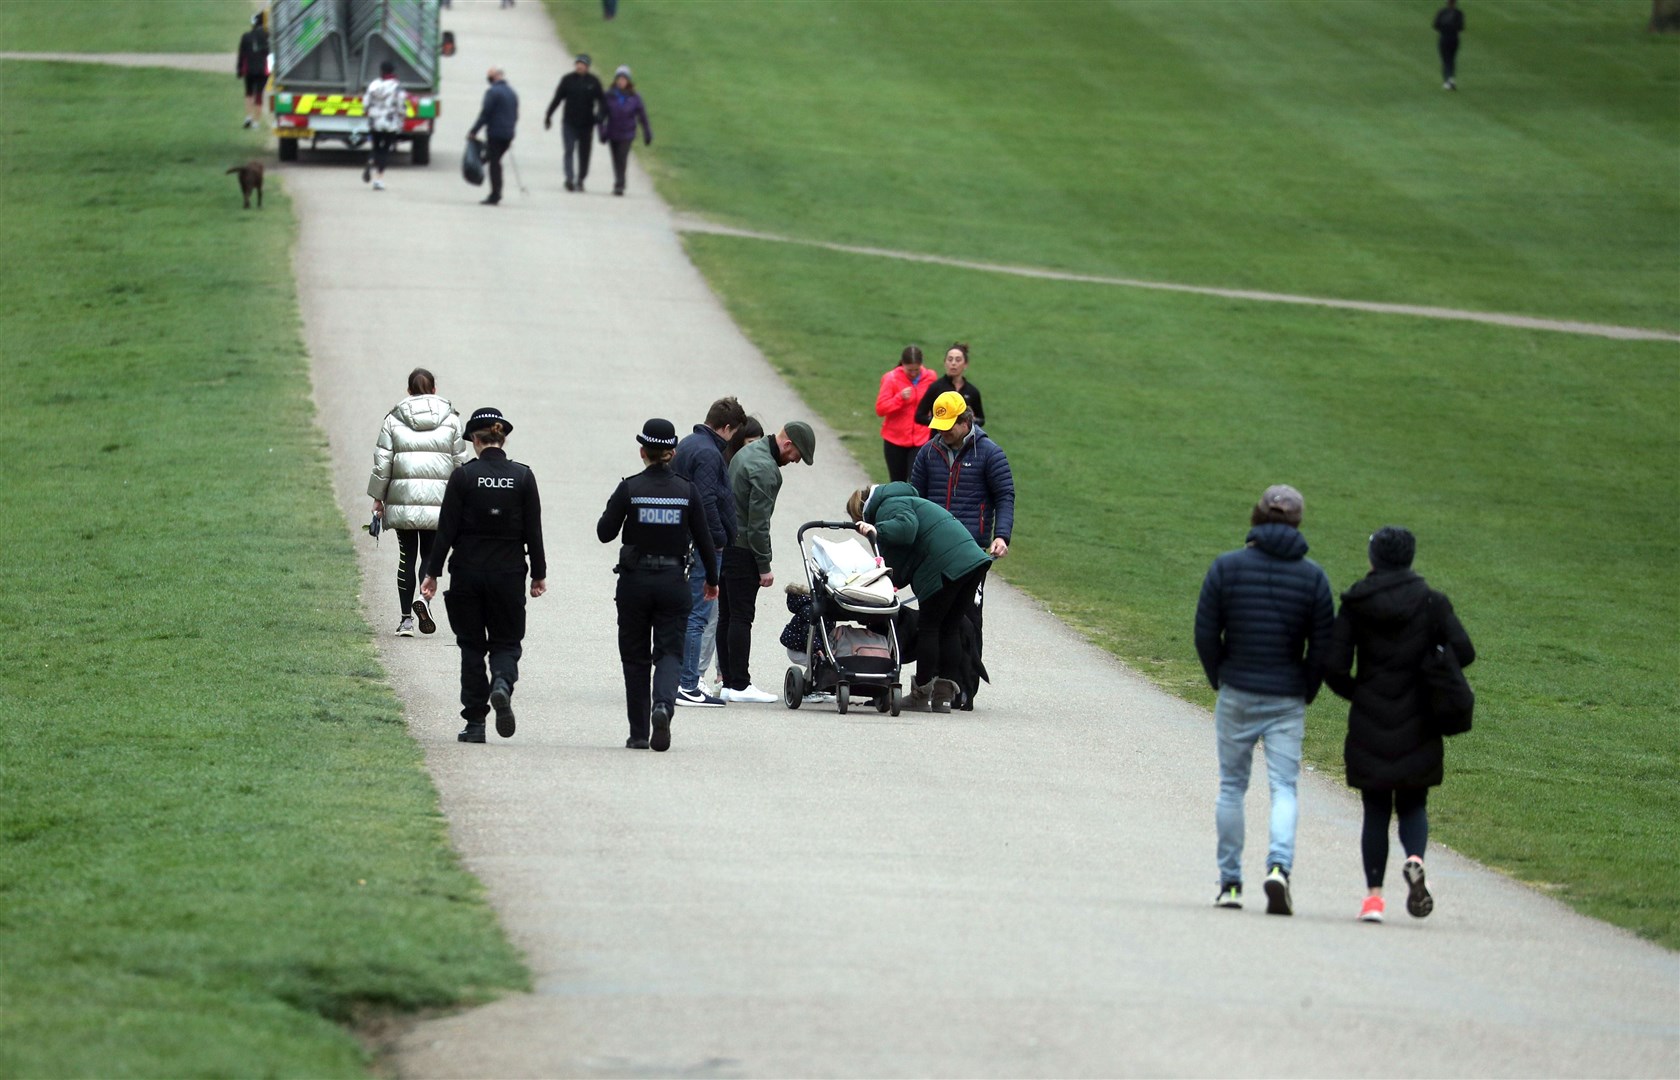 Police officers monitor the crowds on the Long Walk at Windsor (Steve Parsons/PA)